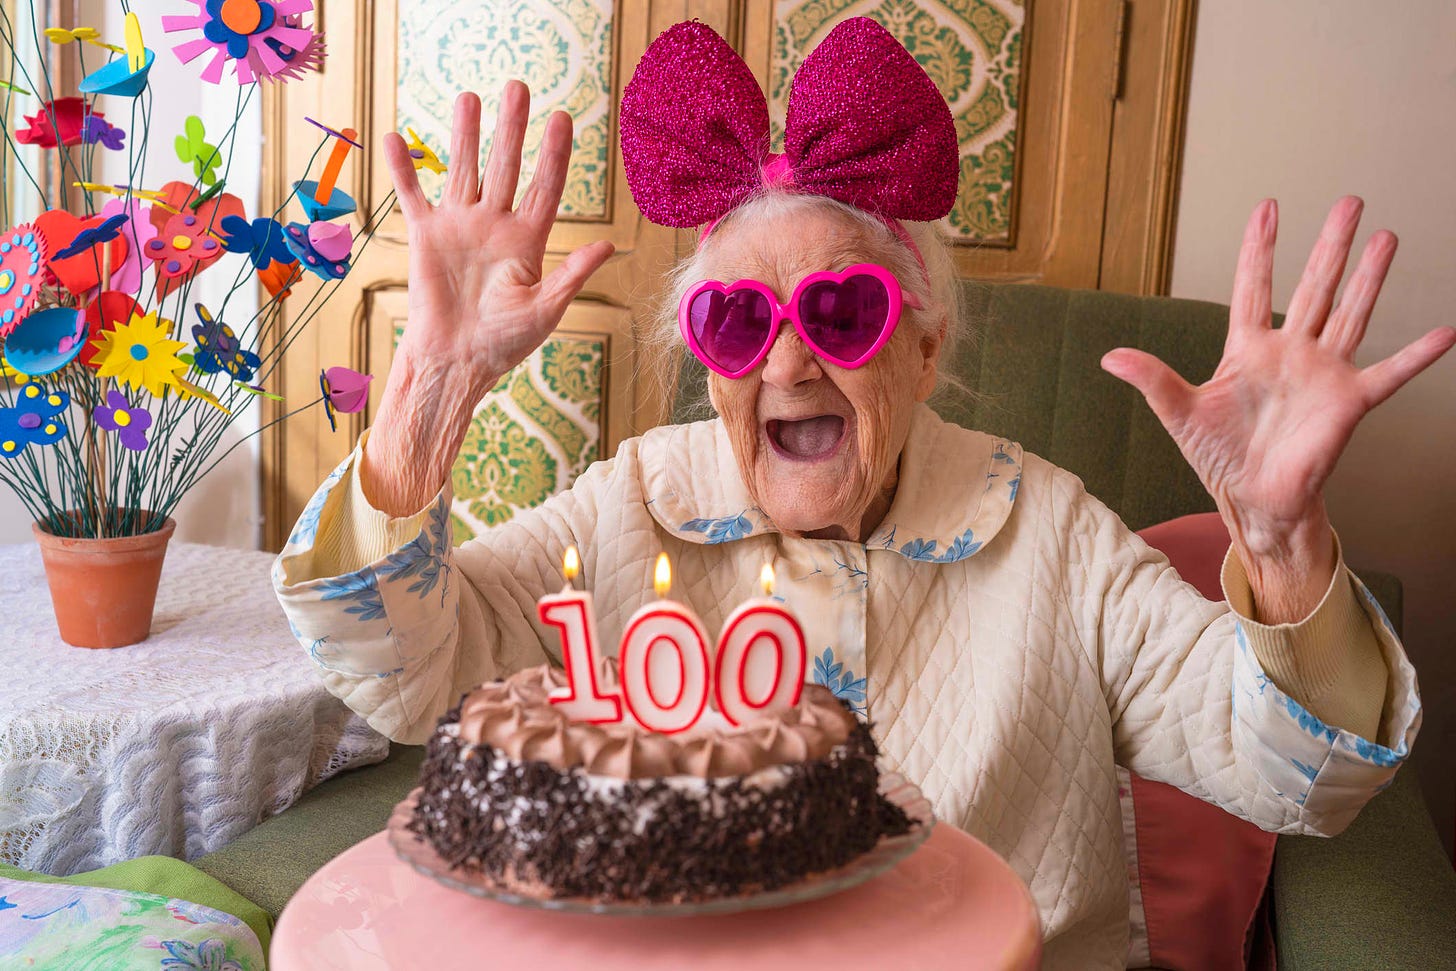 Turning 100? Your birthday gift could be an unexpected tax